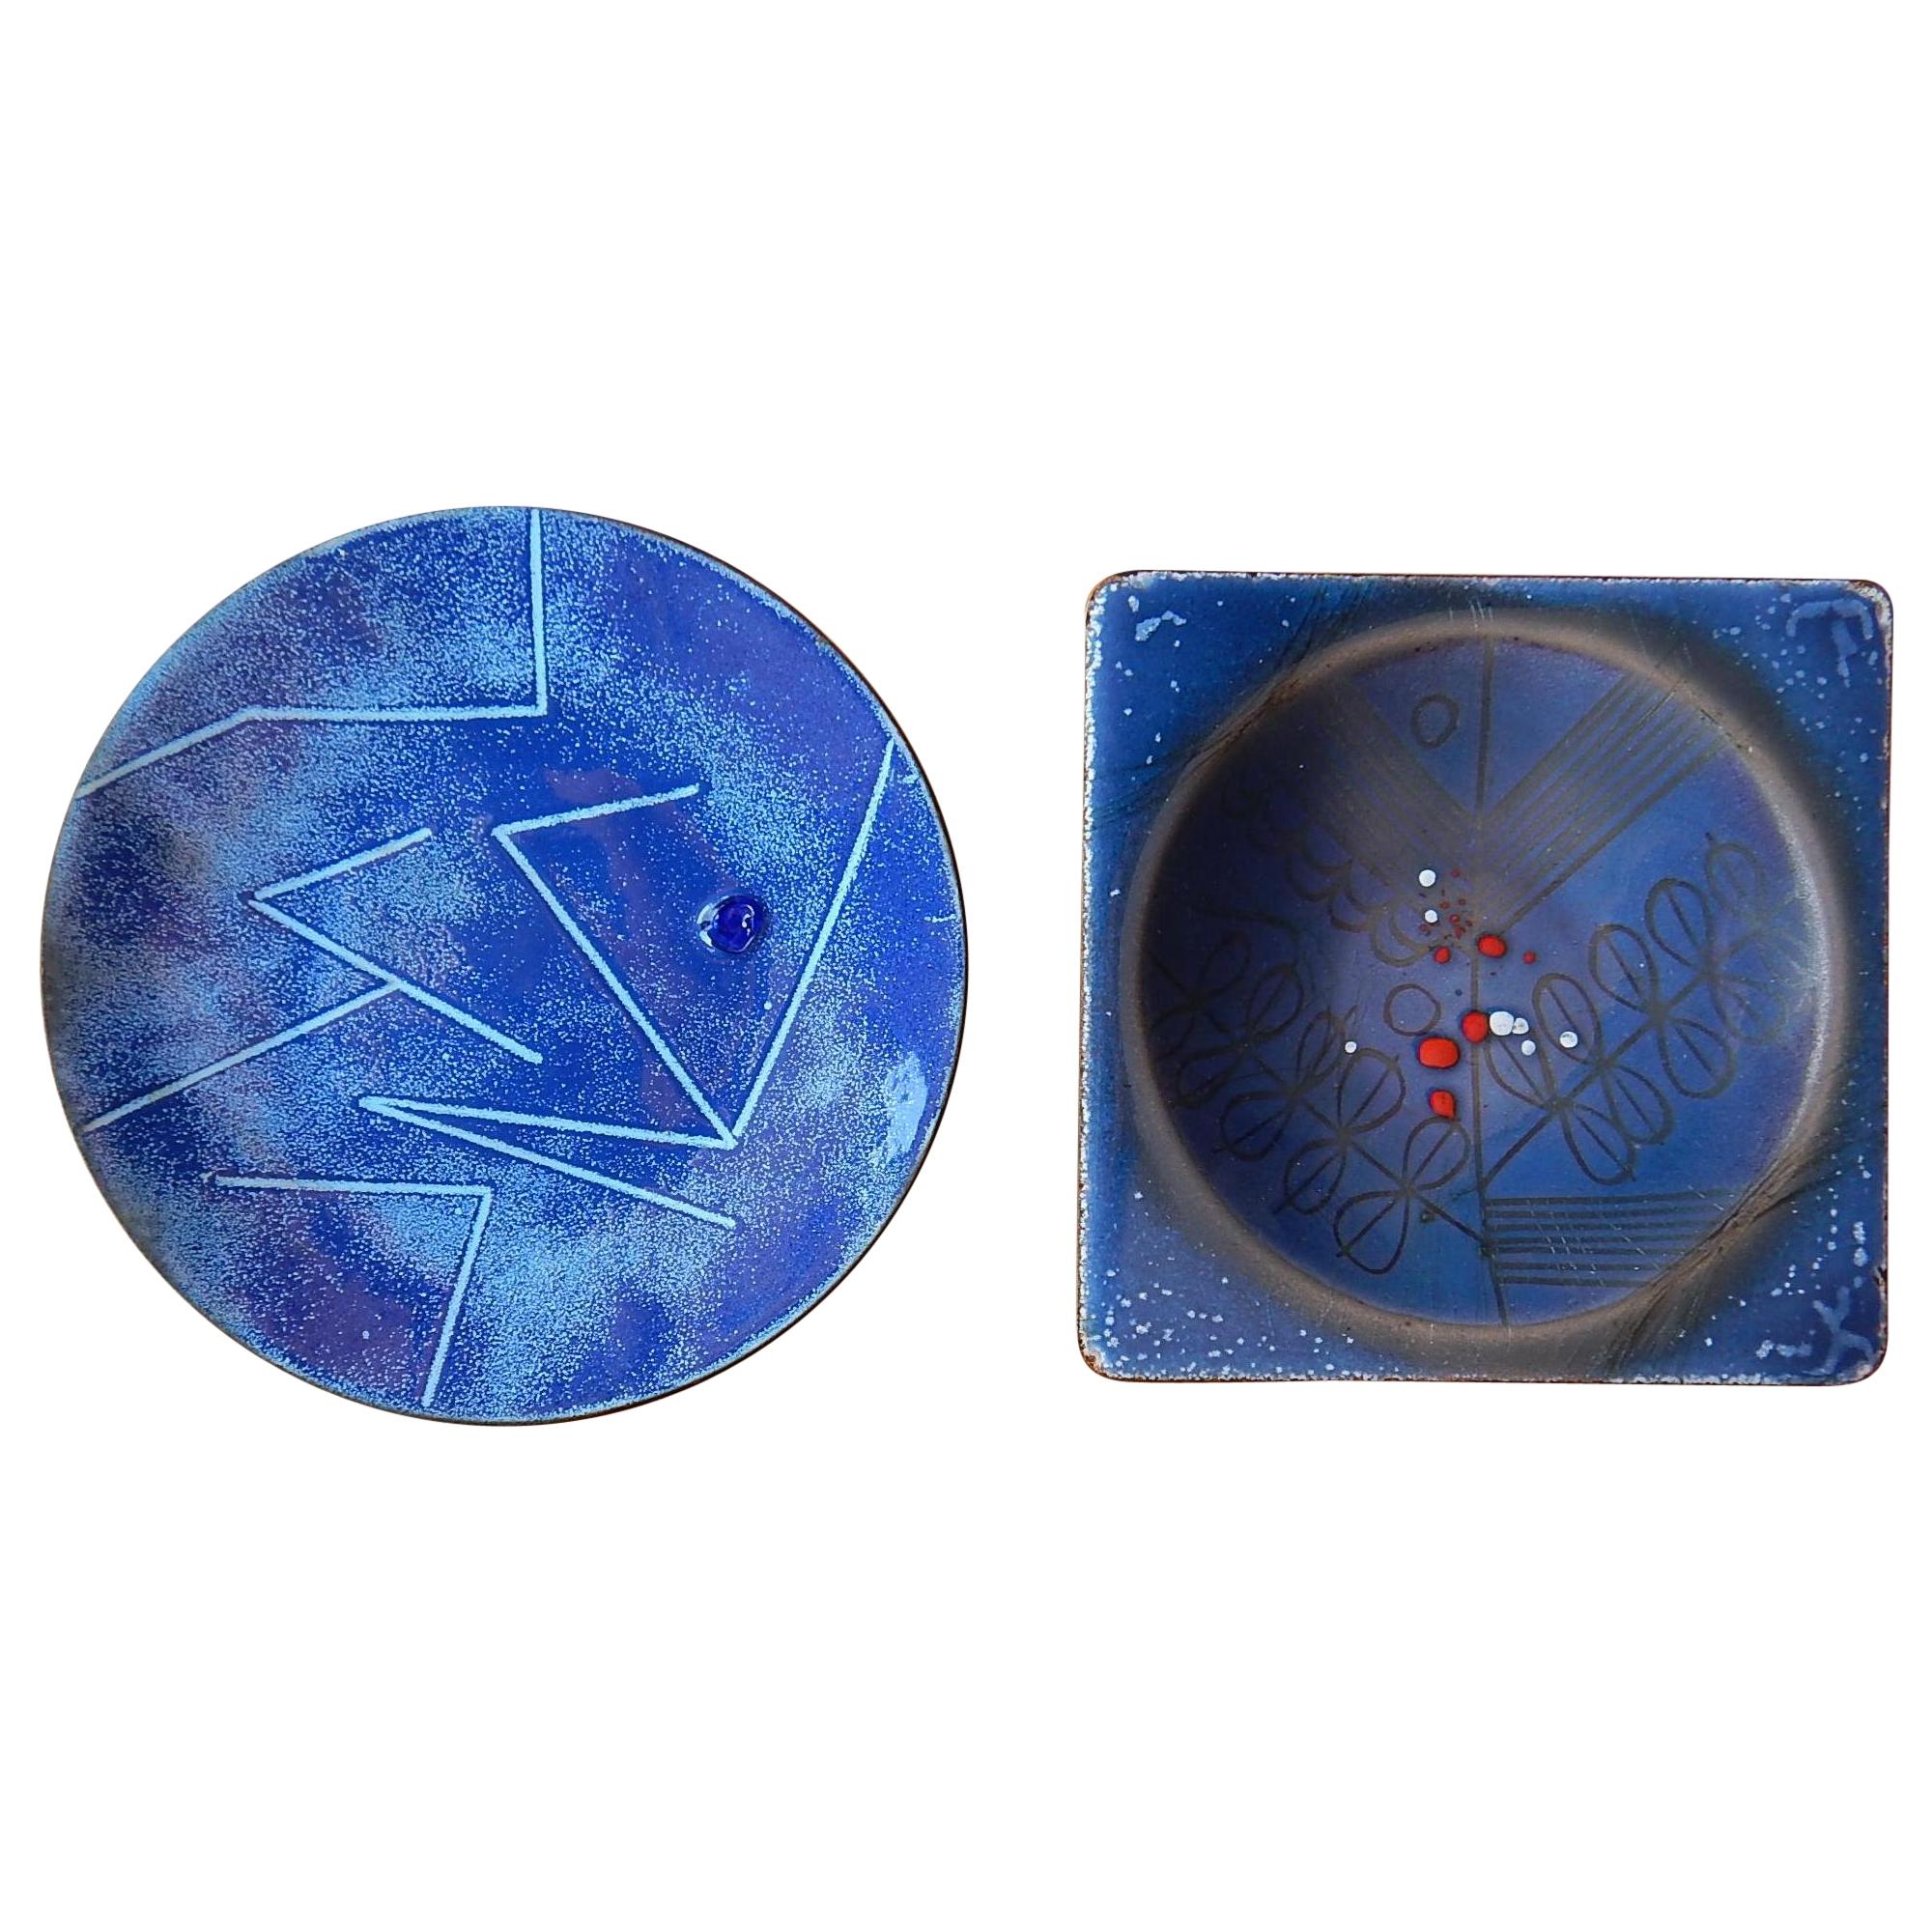 Edward Winter Pair of Modern Abstract Design Copper Enamel Trays For Sale